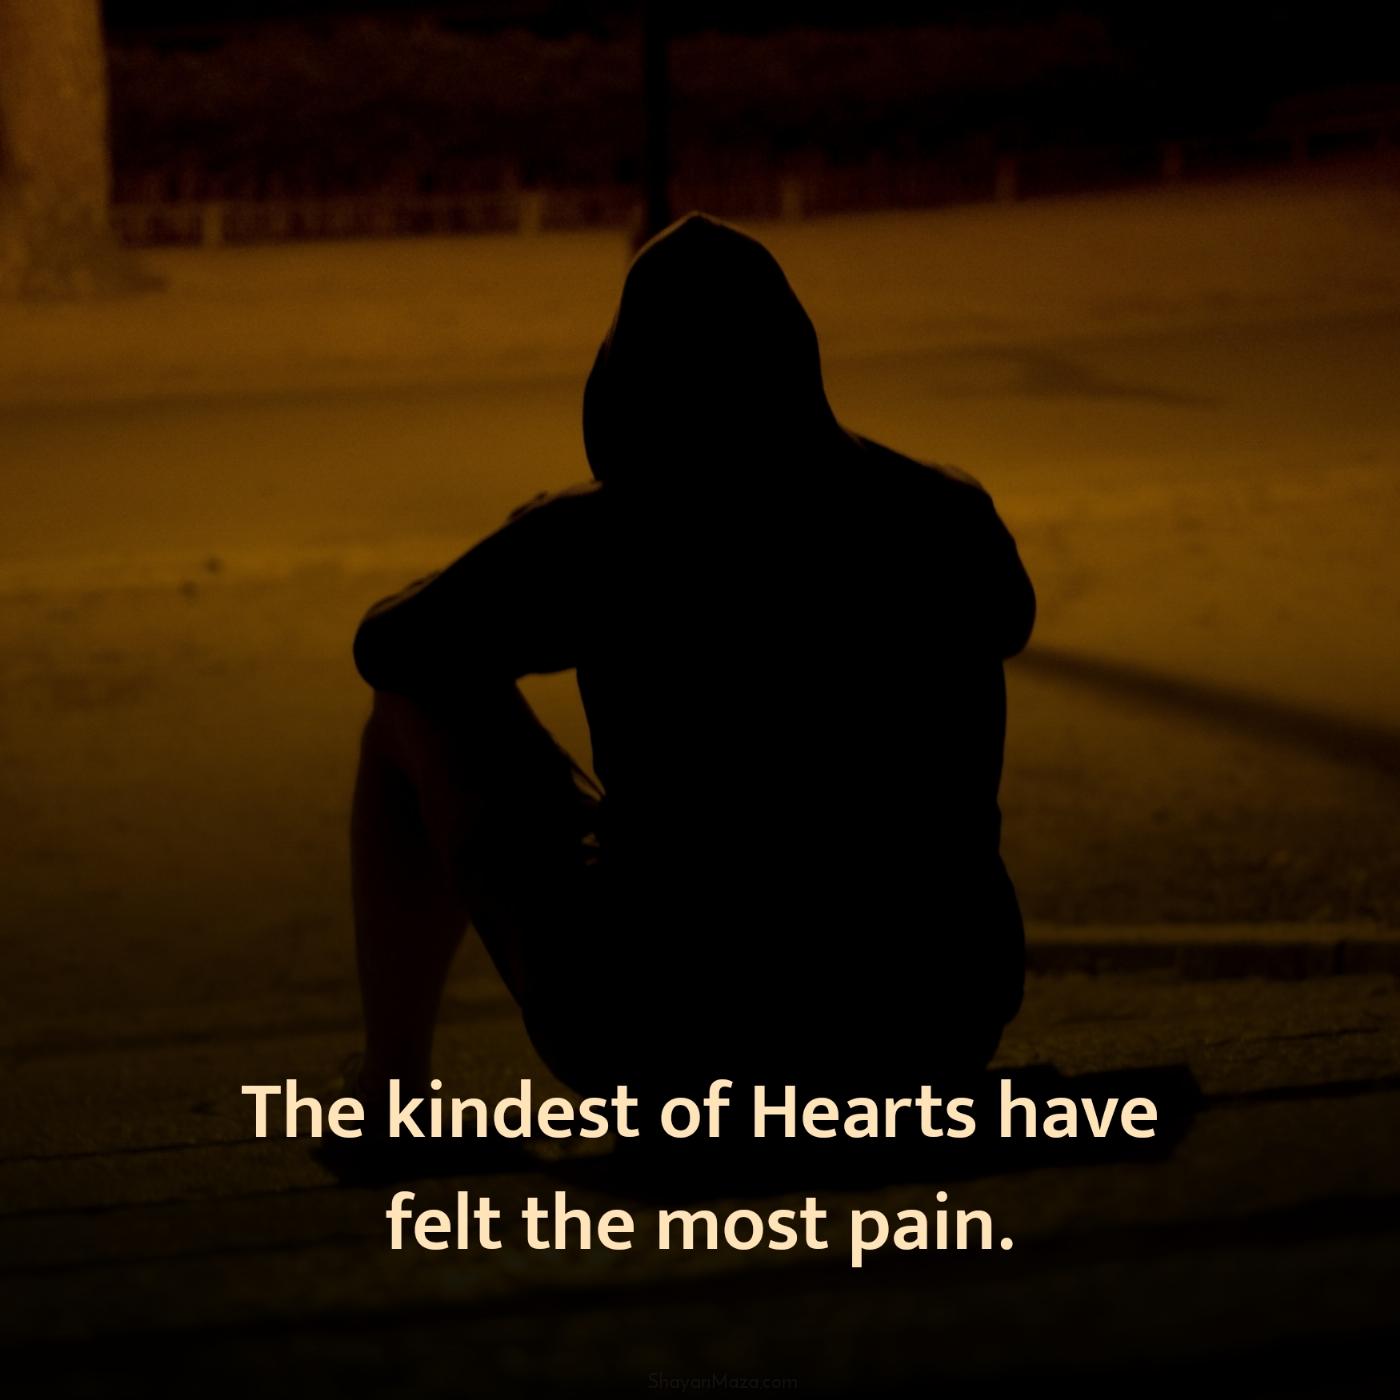 The kindest of Hearts have felt the most pain